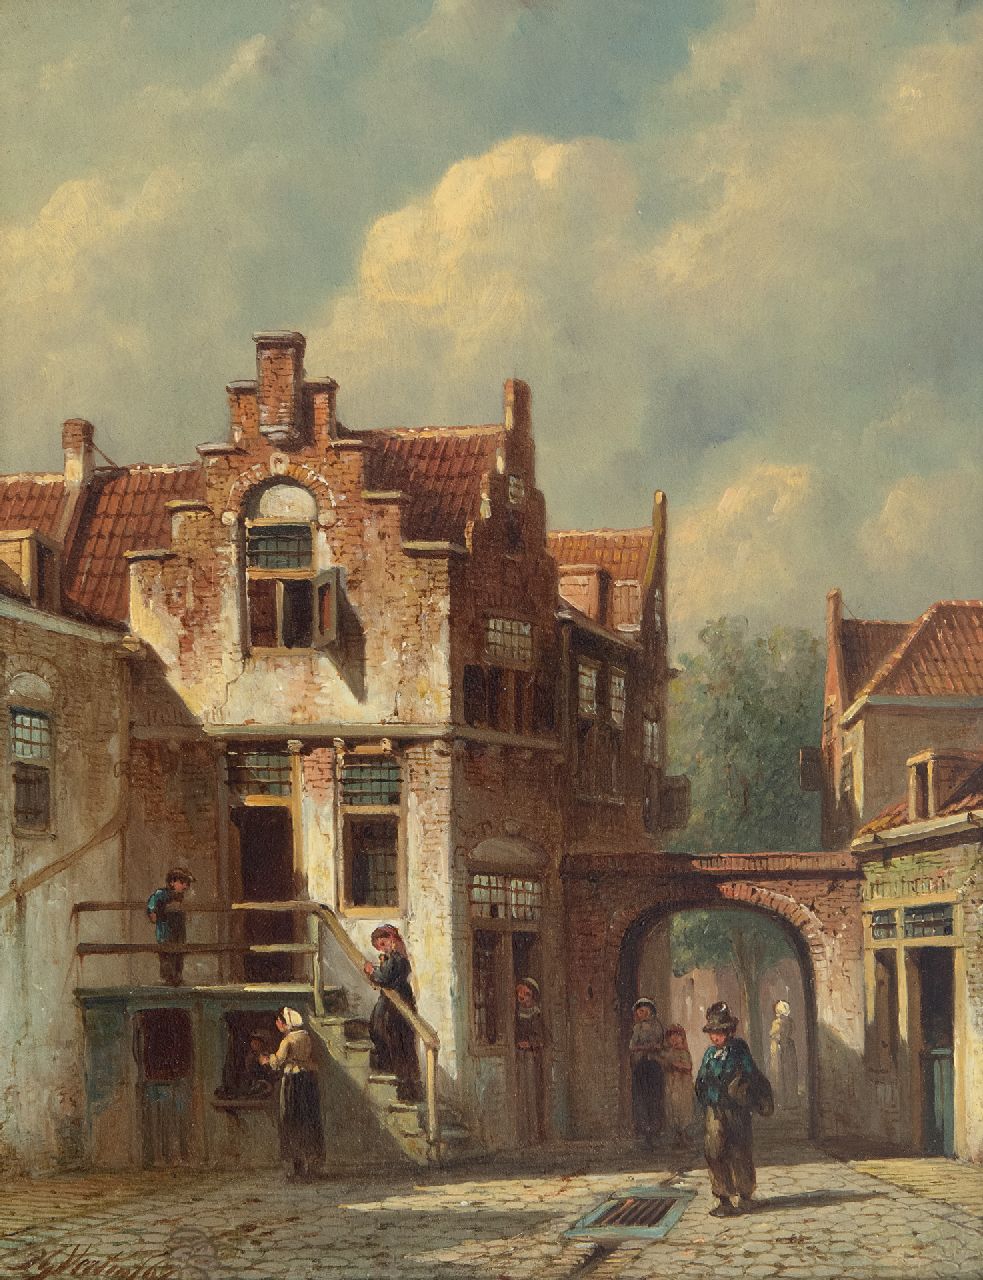 Vertin P.G.  | Petrus Gerardus Vertin | Paintings offered for sale | A sunny Dutch street and some people at the town gate, oil on panel 26.1 x 20.5 cm, signed l.l. and dated '67